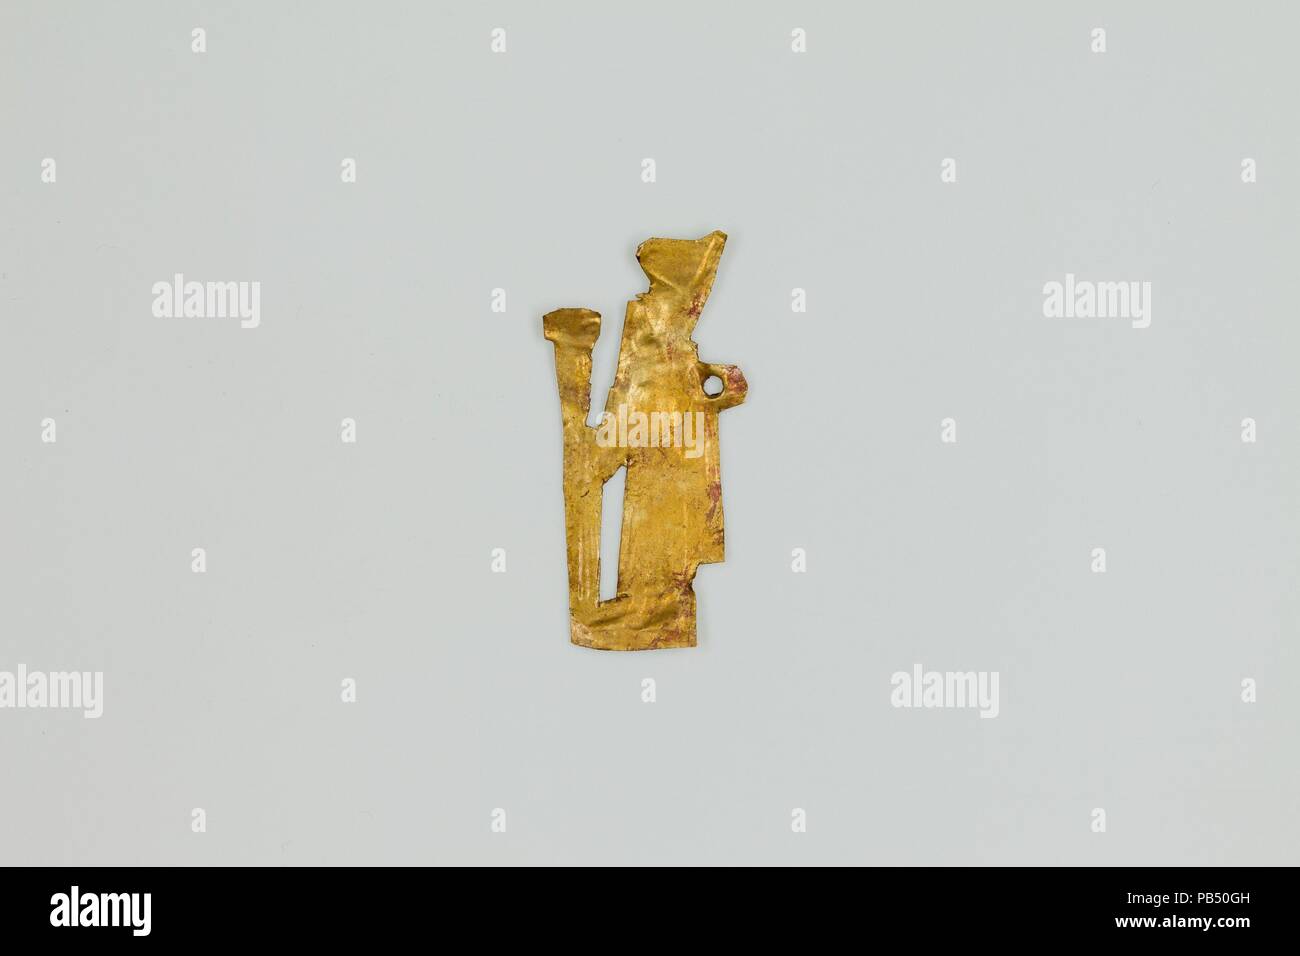 Neith (?) amulet. Dimensions: l. 2.3 cm (7/8 in.) × h. 1.1 cm (7/16 in.). Dynasty: Dynasty 26-29. Date: 664-380 B.C.. Museum: Metropolitan Museum of Art, New York, USA. Stock Photo